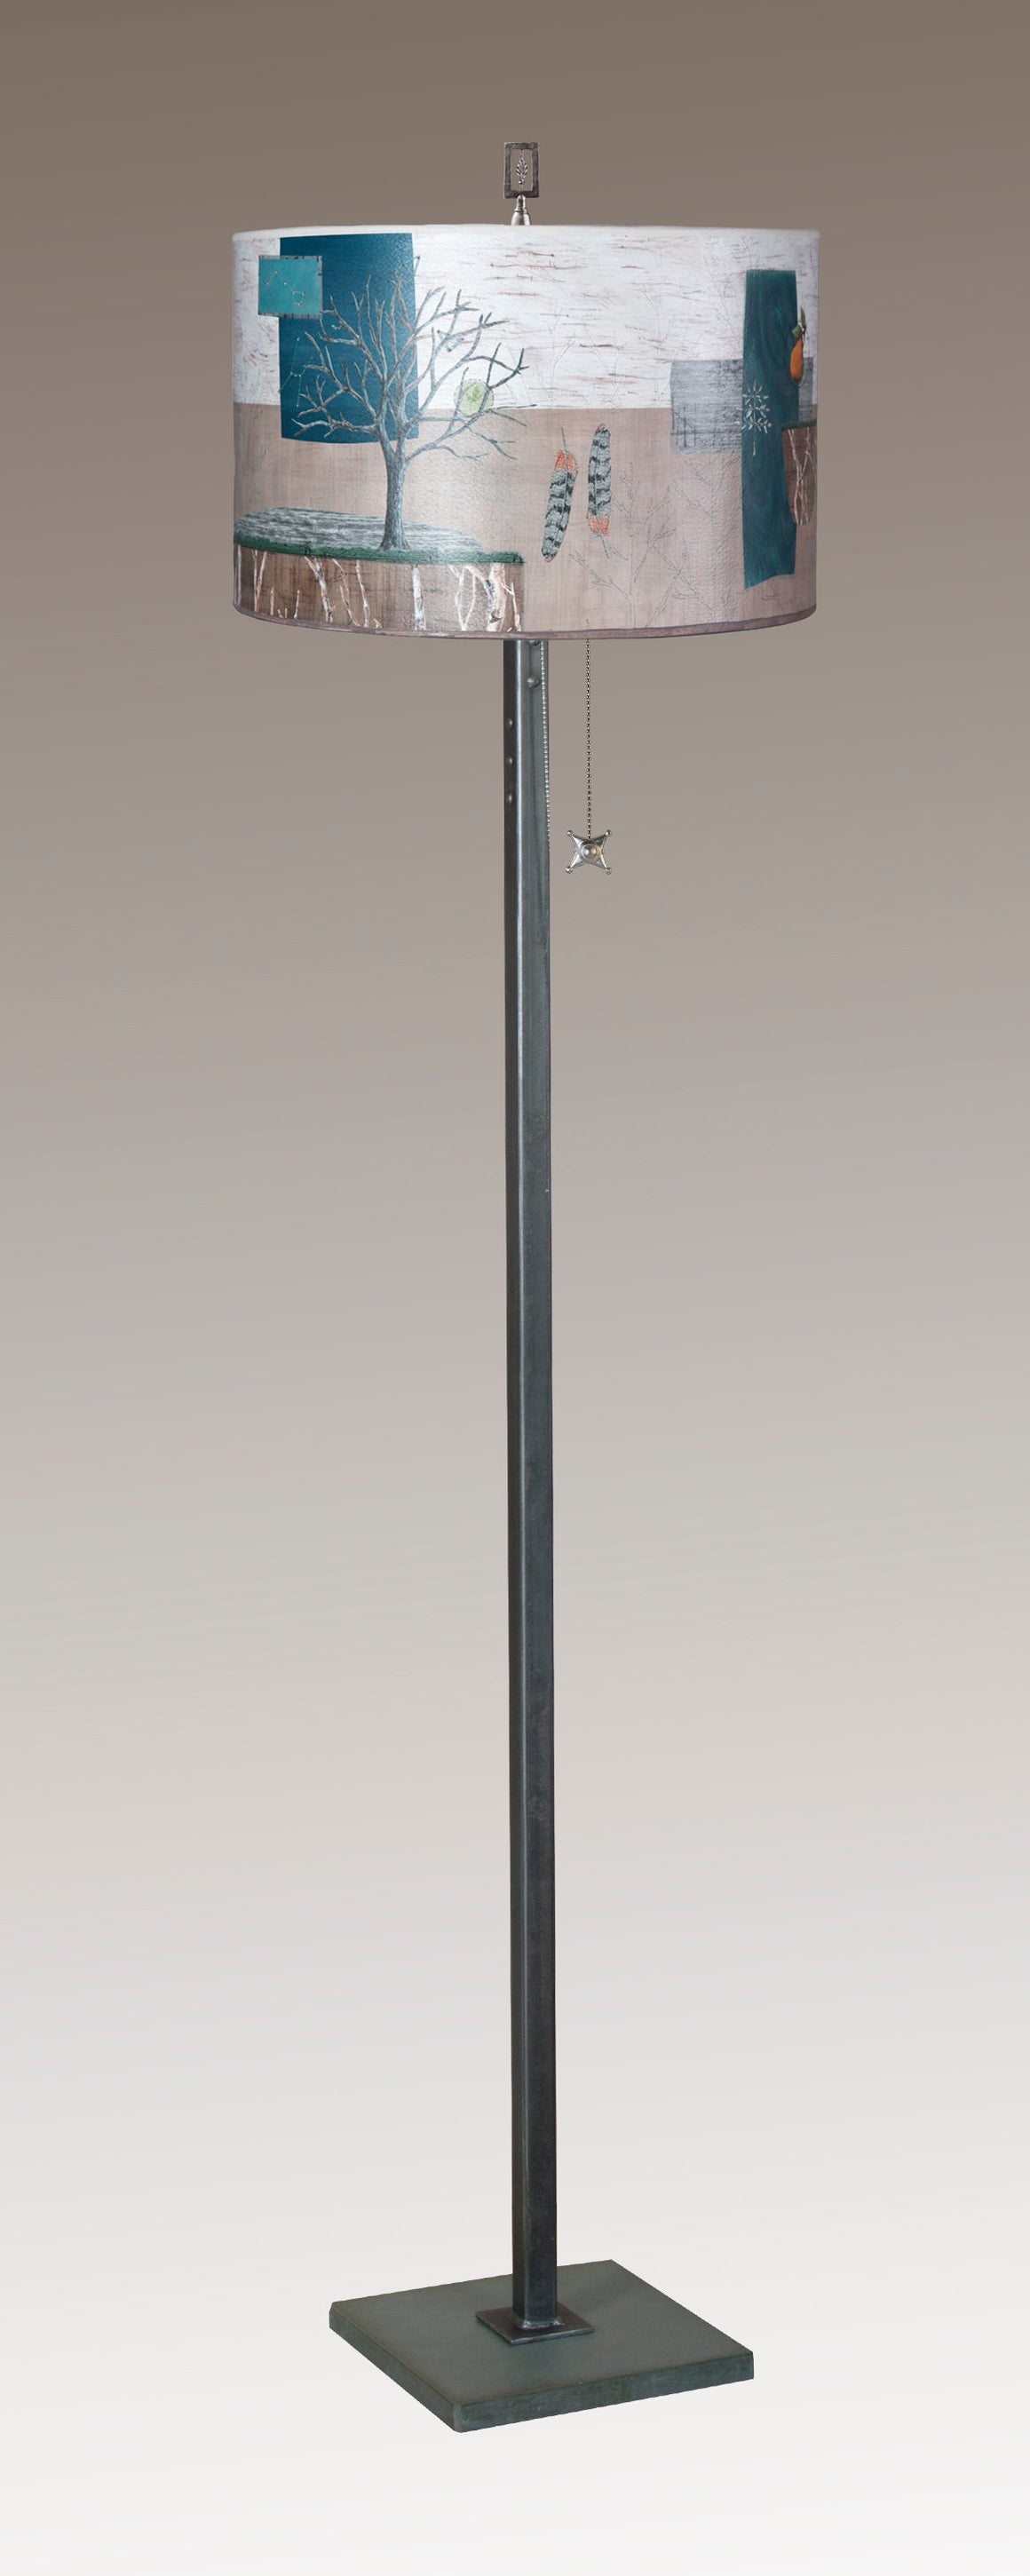 Steel Floor Lamp with Large Drum Shade in Wander in Drift